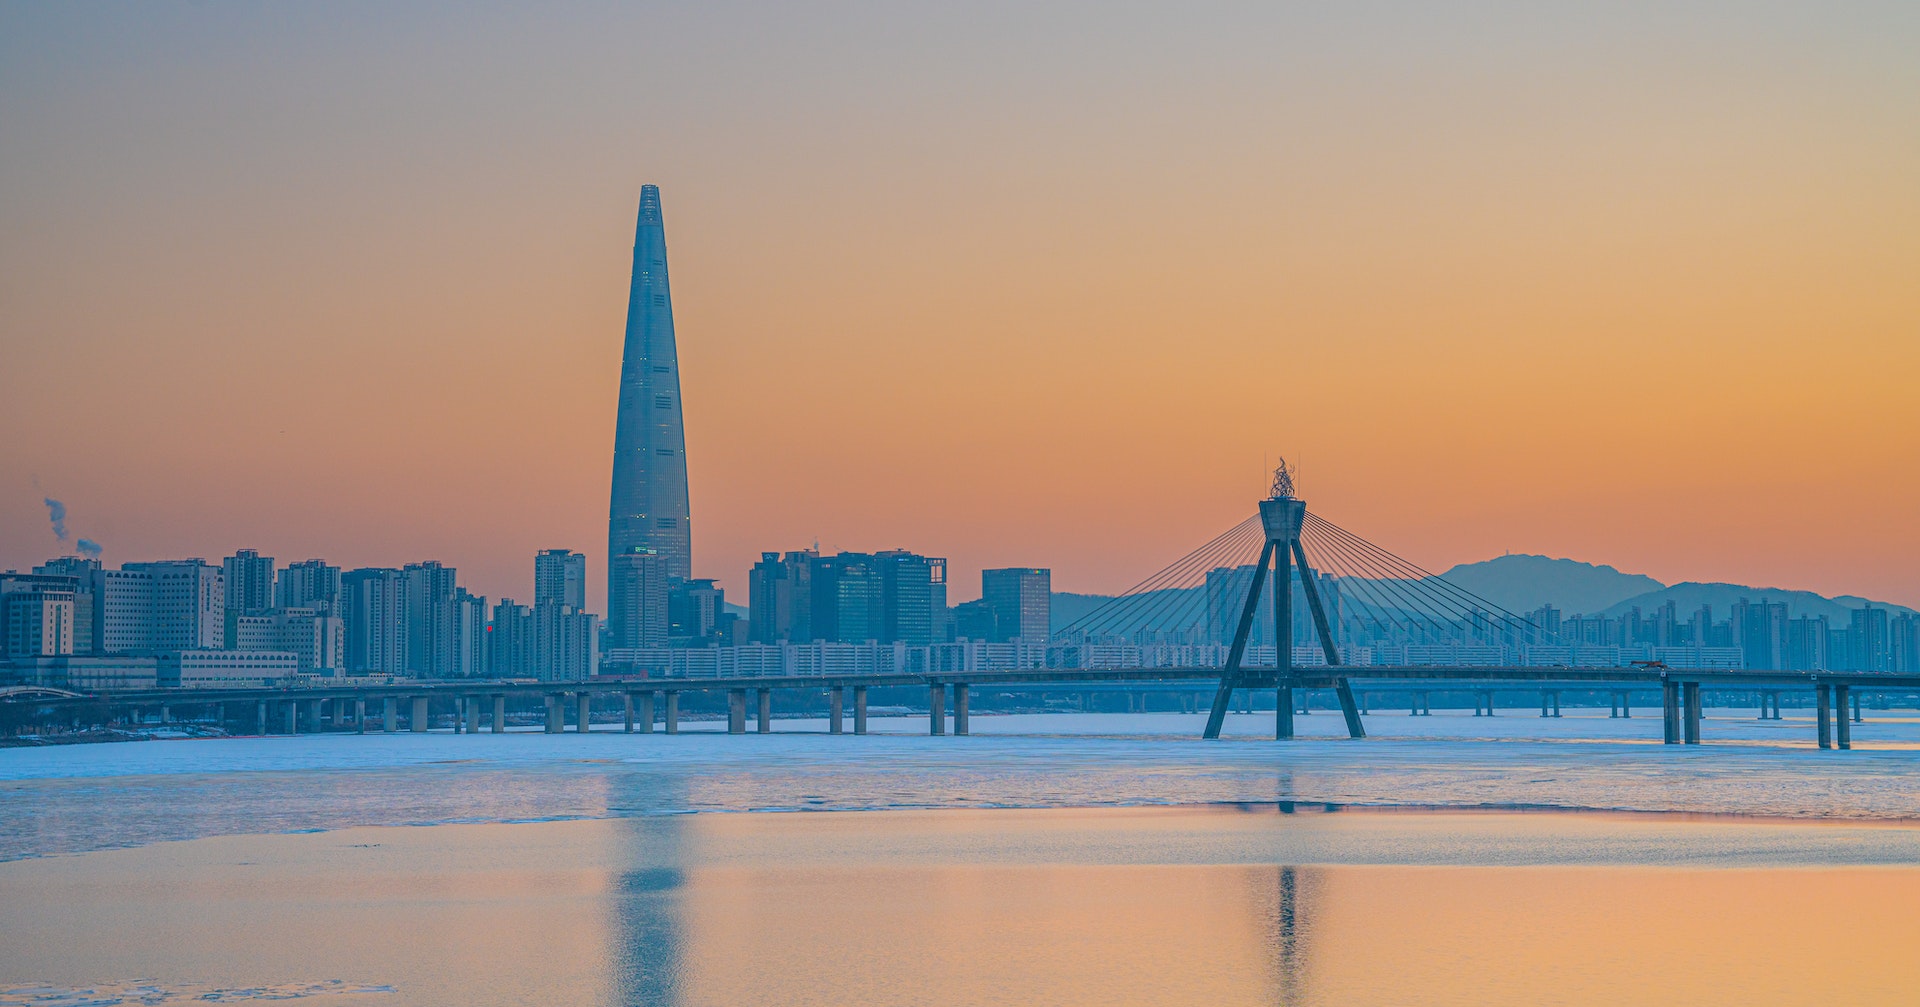 Sunset at Seoul with view of lotte tower